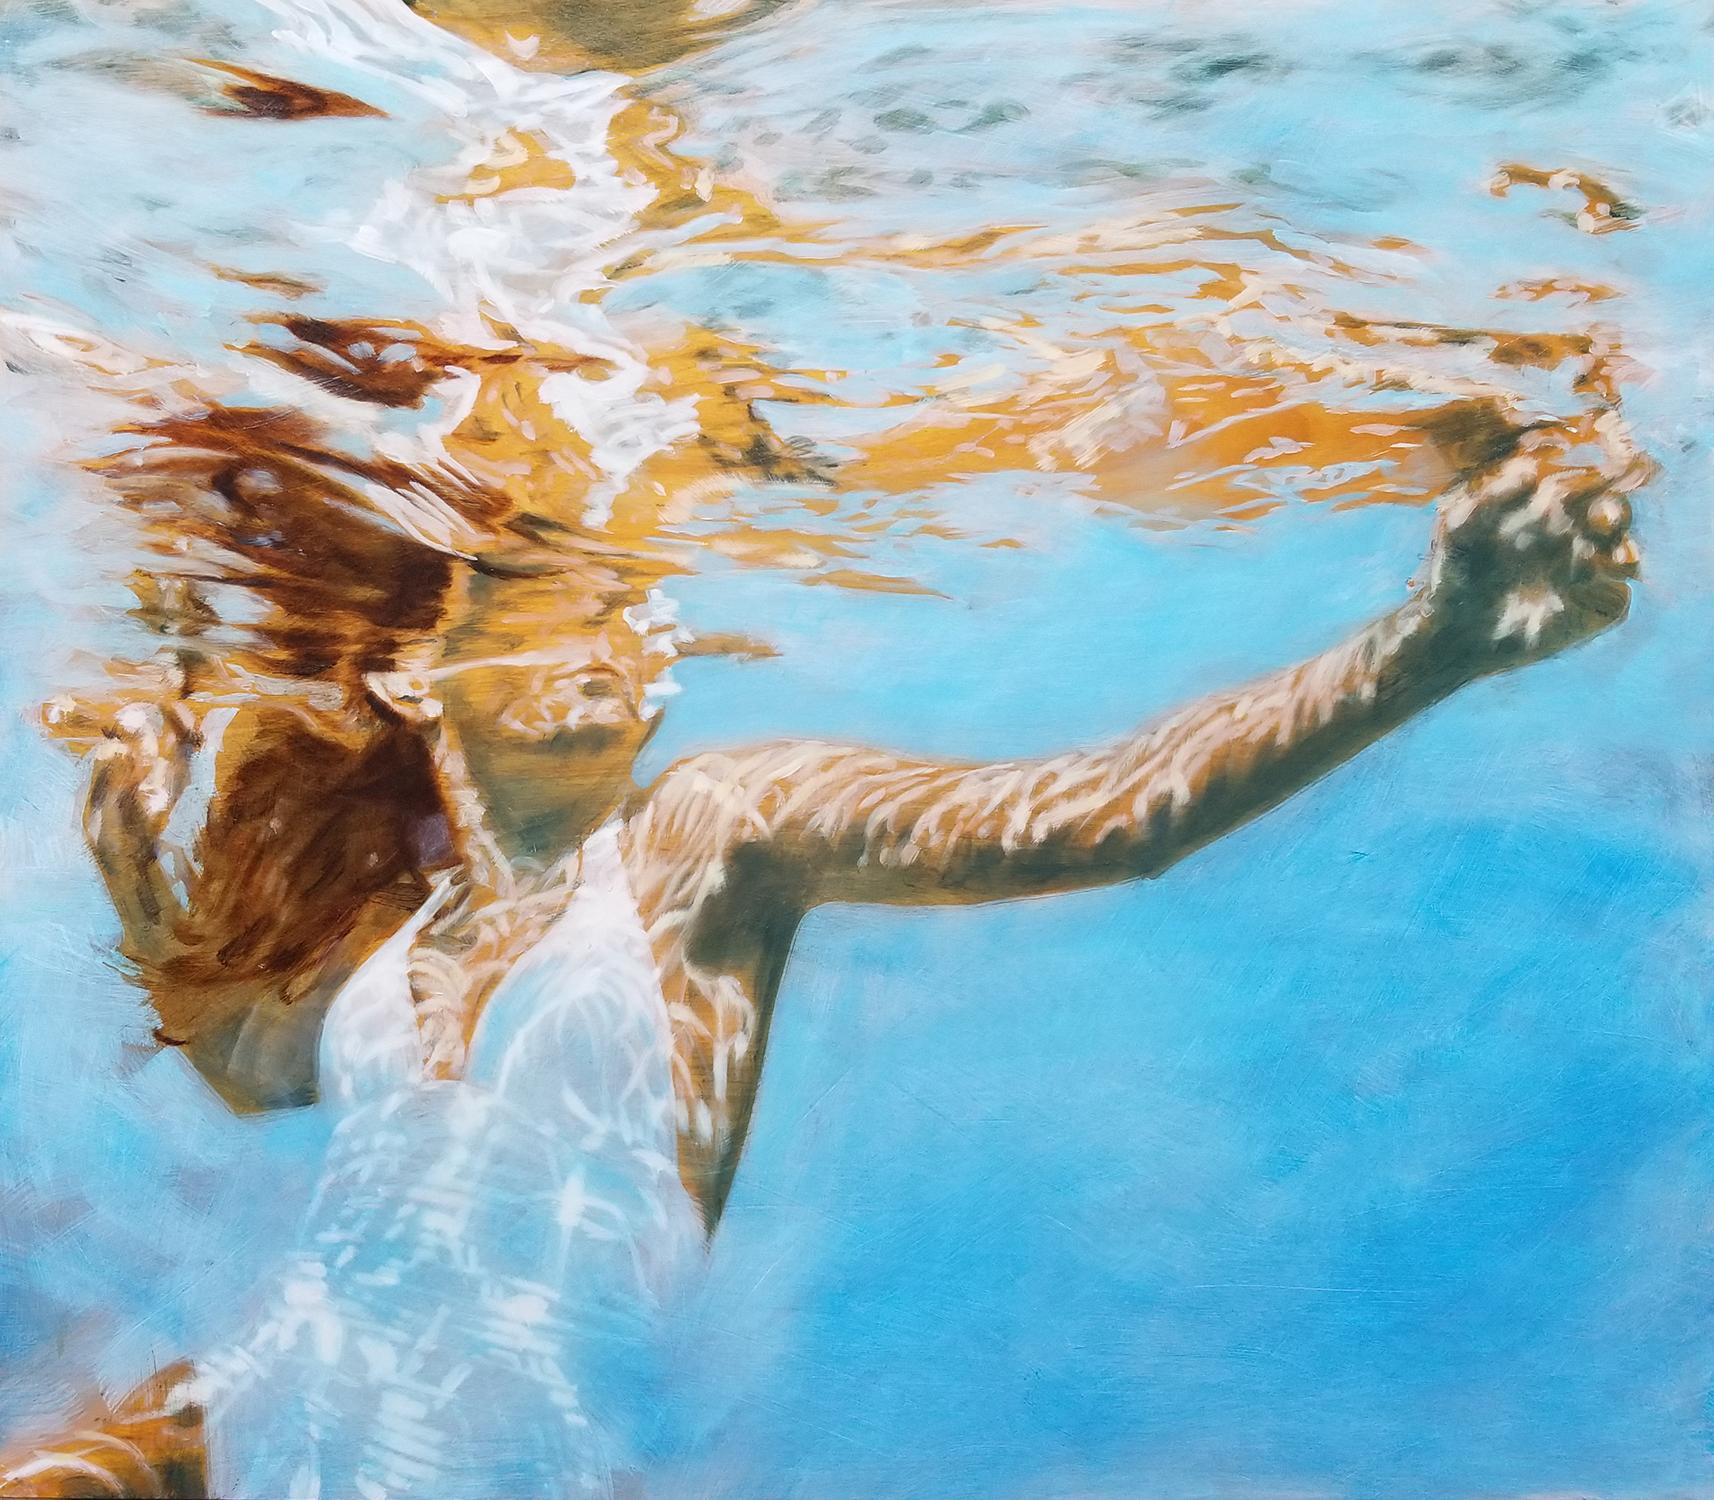 Carol Bennett Figurative Painting - "Carol" Oil painting of a woman in a white swimsuit in a blue pool